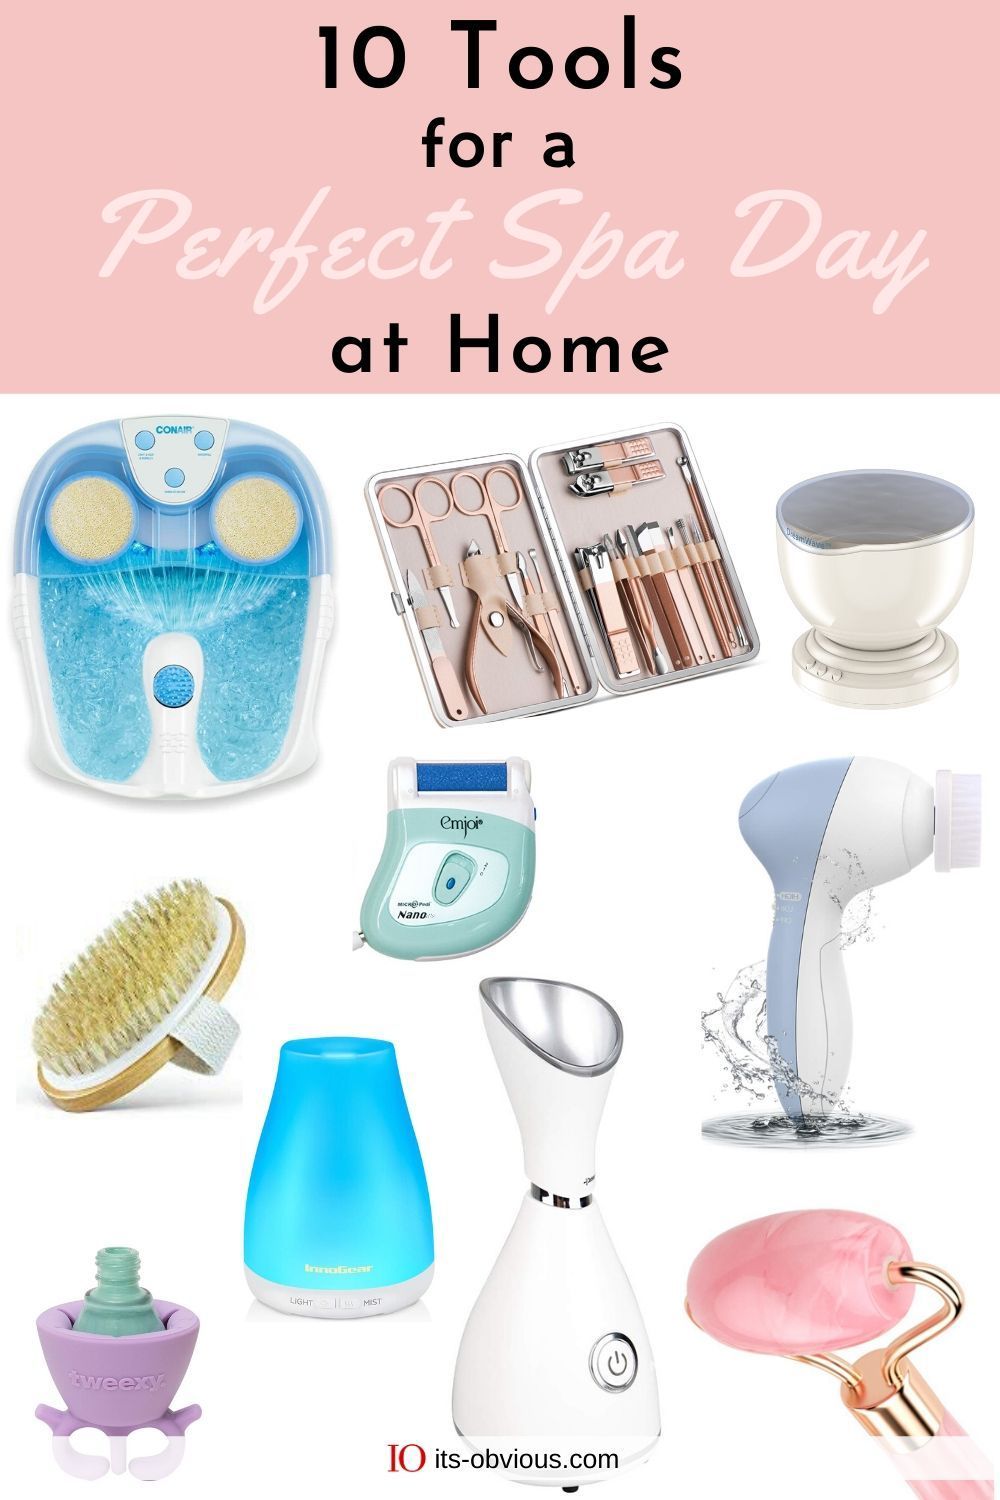 10 tools for a Perfect Spa Day At Home Treatments, How To Have The Perfect At-Home Spa Day - 10 tools for a Perfect Spa Day At Home Treatments, How To Have The Perfect At-Home Spa Day -   17 beauty Treatments spa ideas